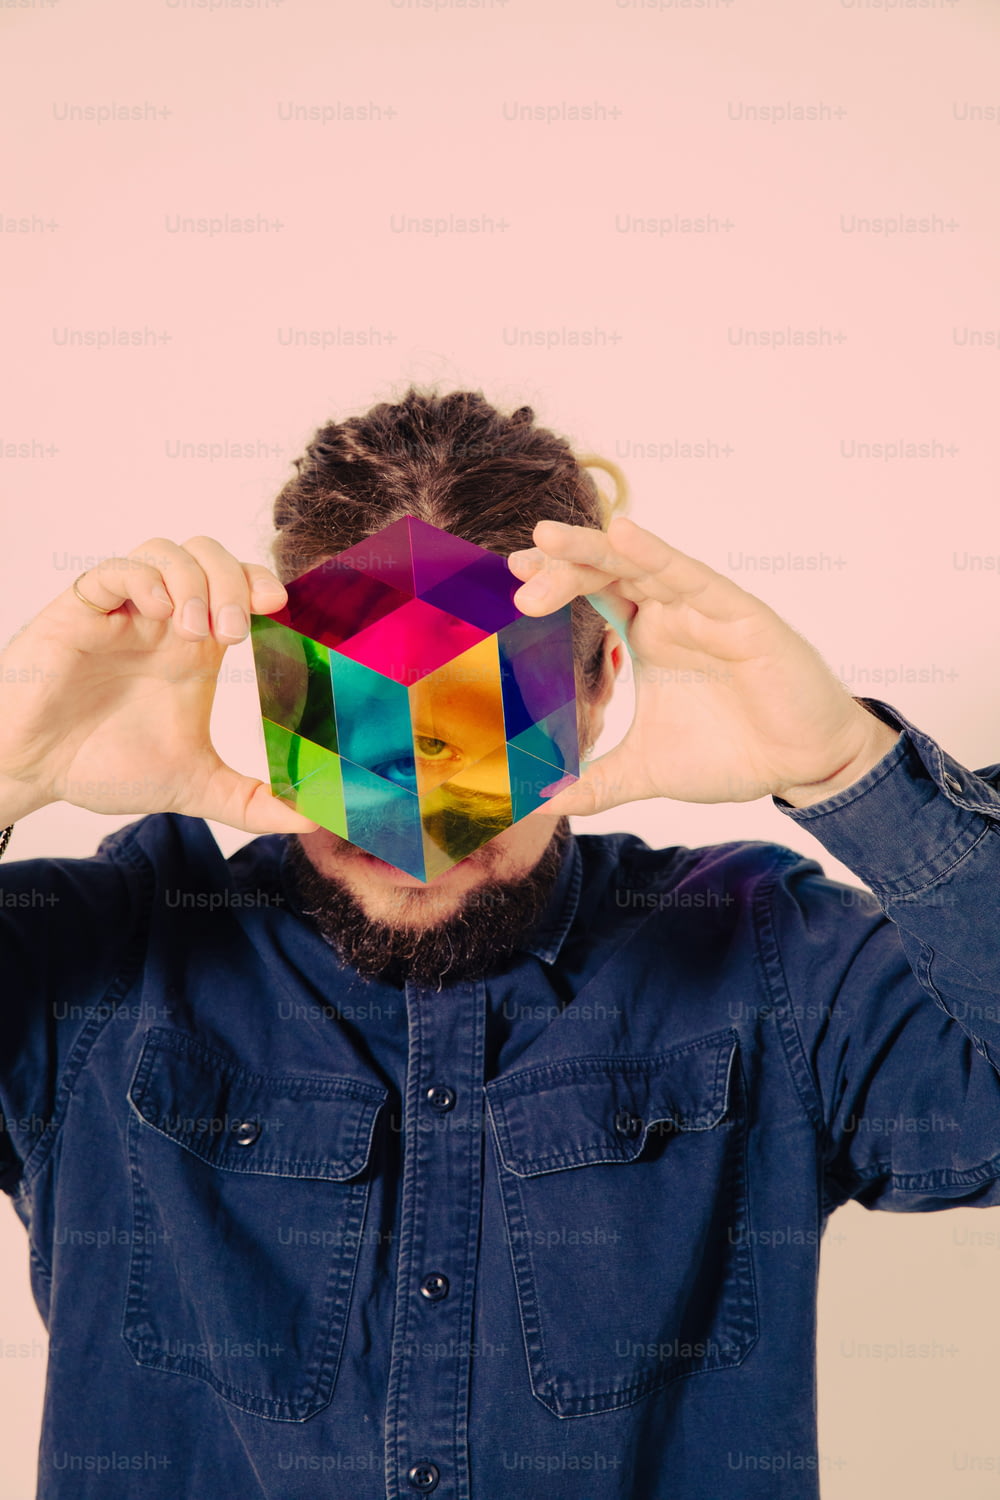 a man covering his face with a colorful cube